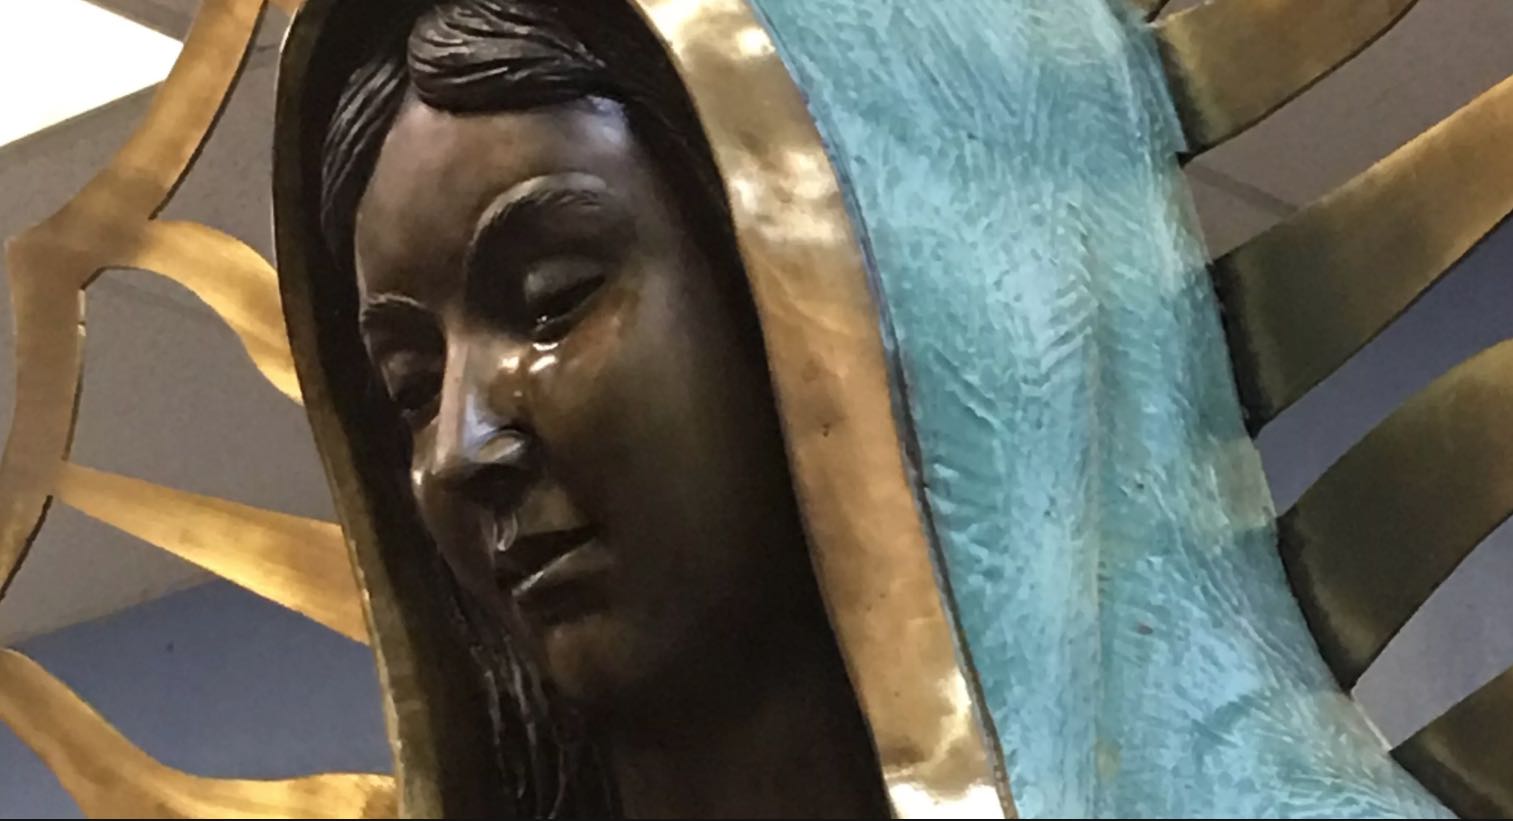 Virgin Mary statue 'weeping olive oil' (Watch)